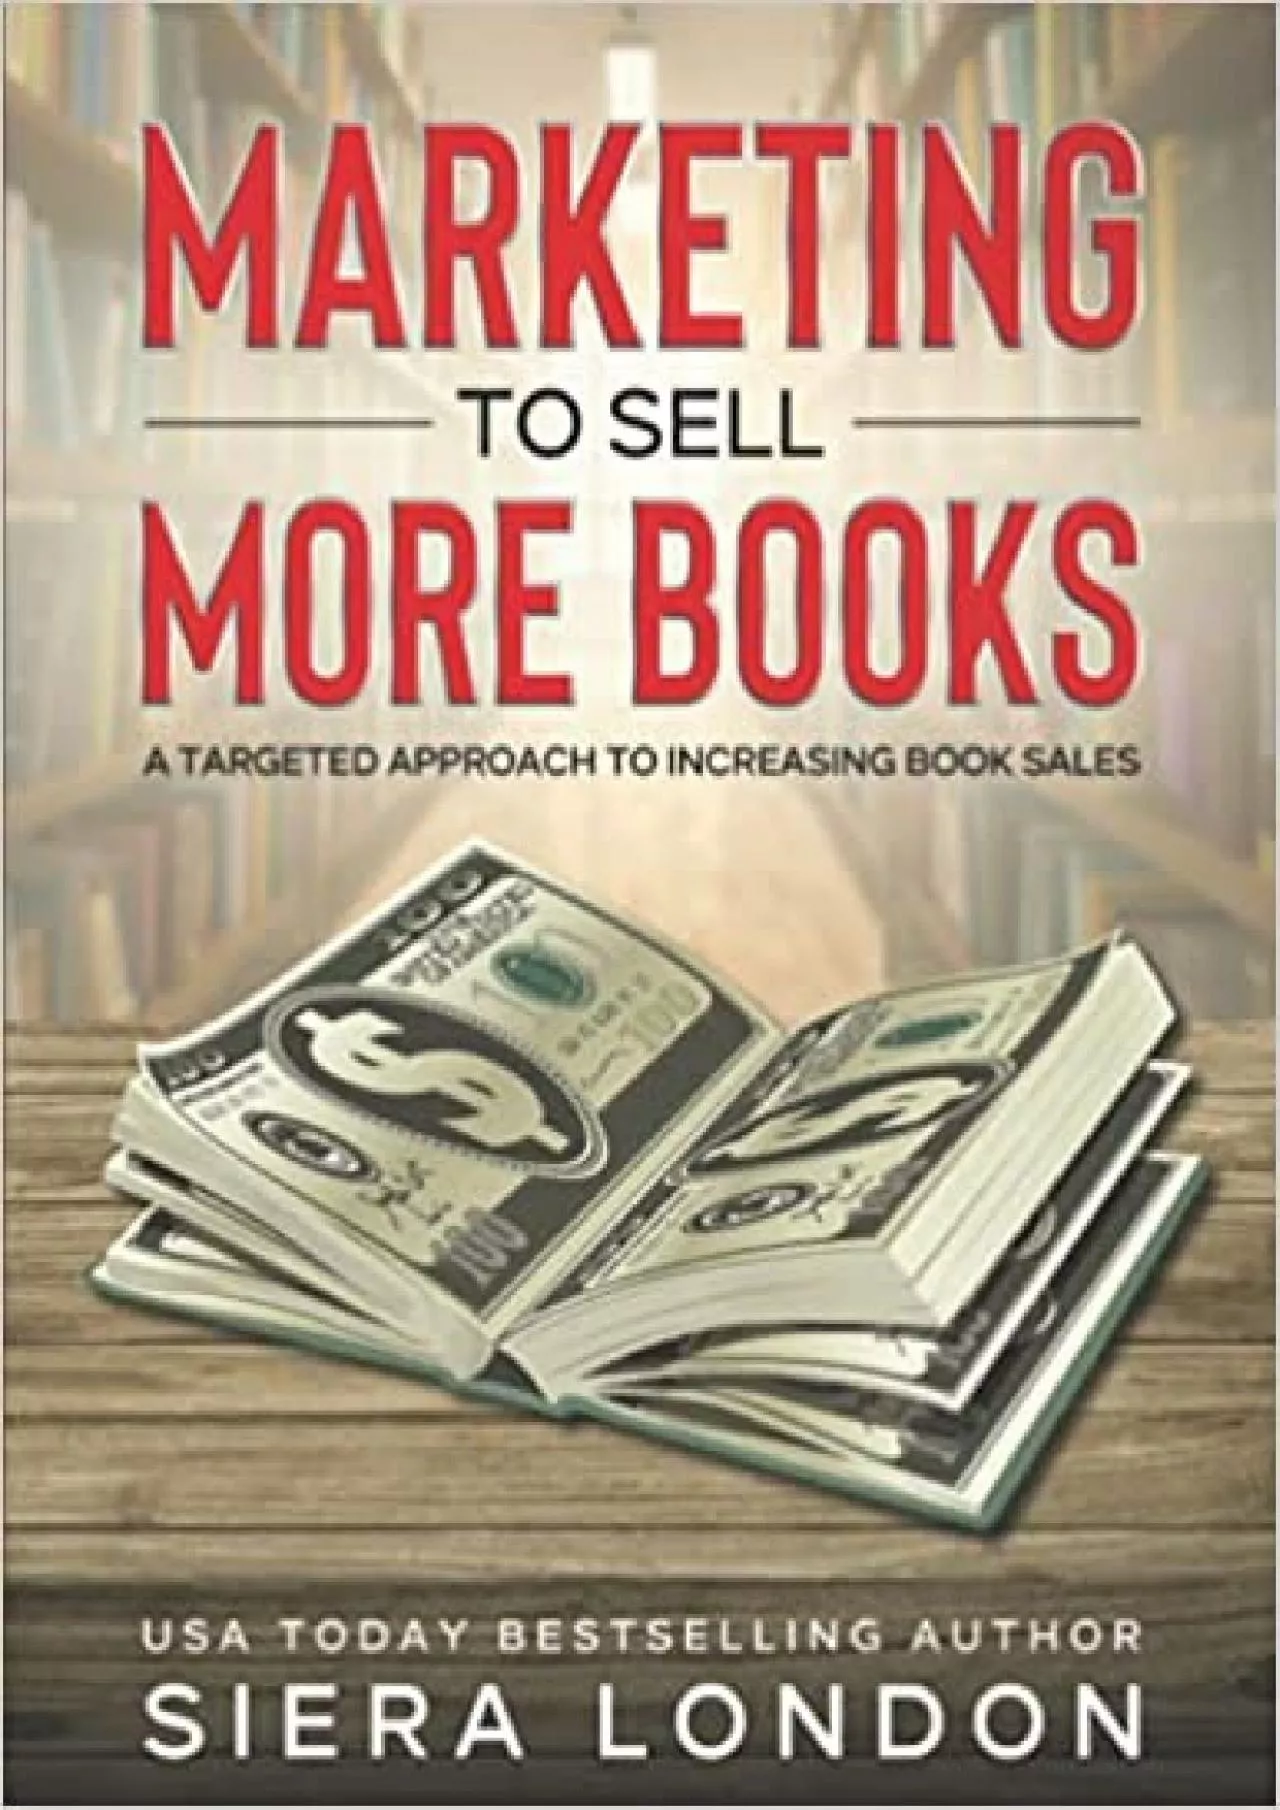 Marketing to Sell More Books A Targeted Approach to Increasing Book Sales 2month guided